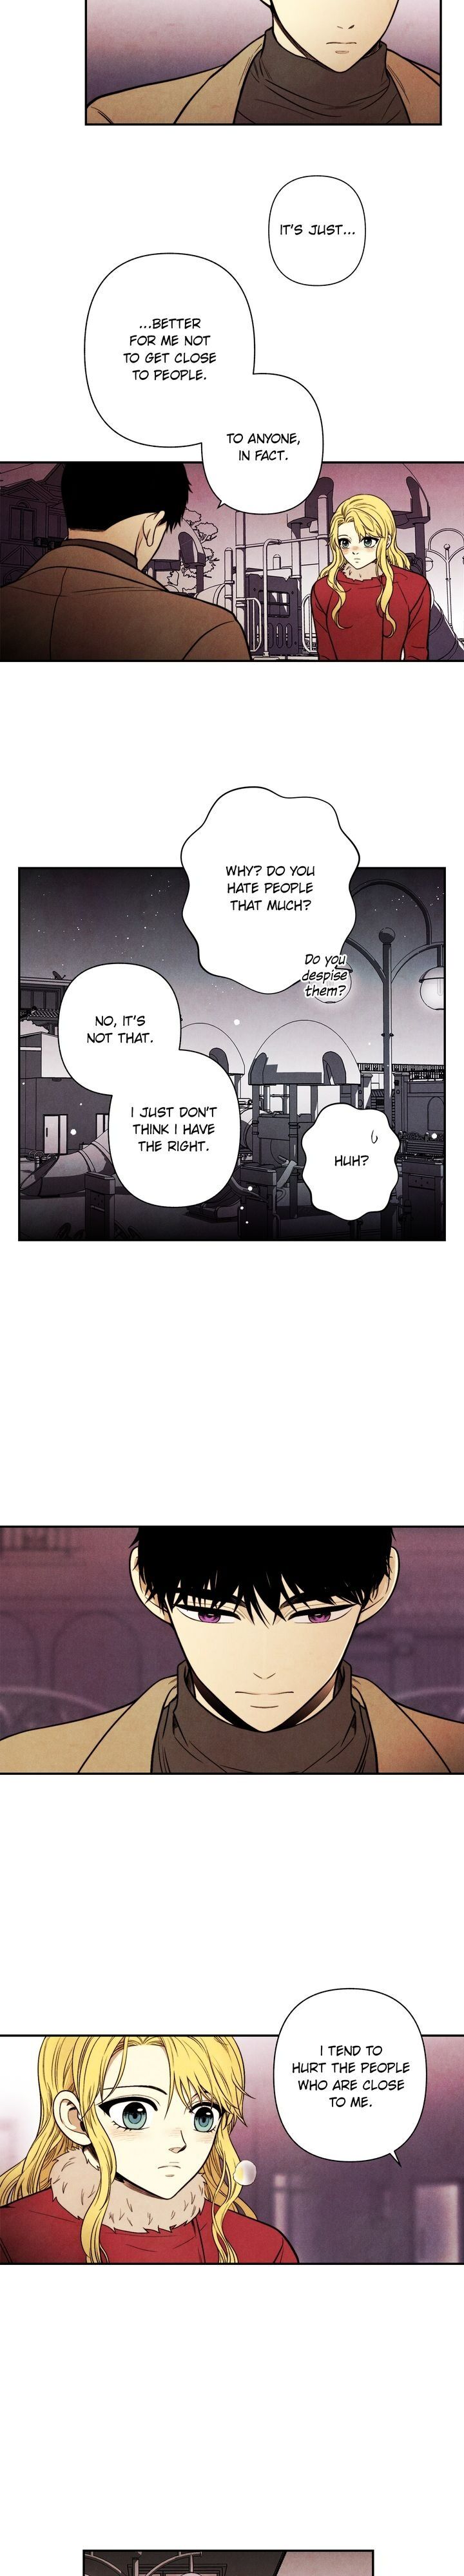 Just Give it to Me - Chapter 147 Page 4